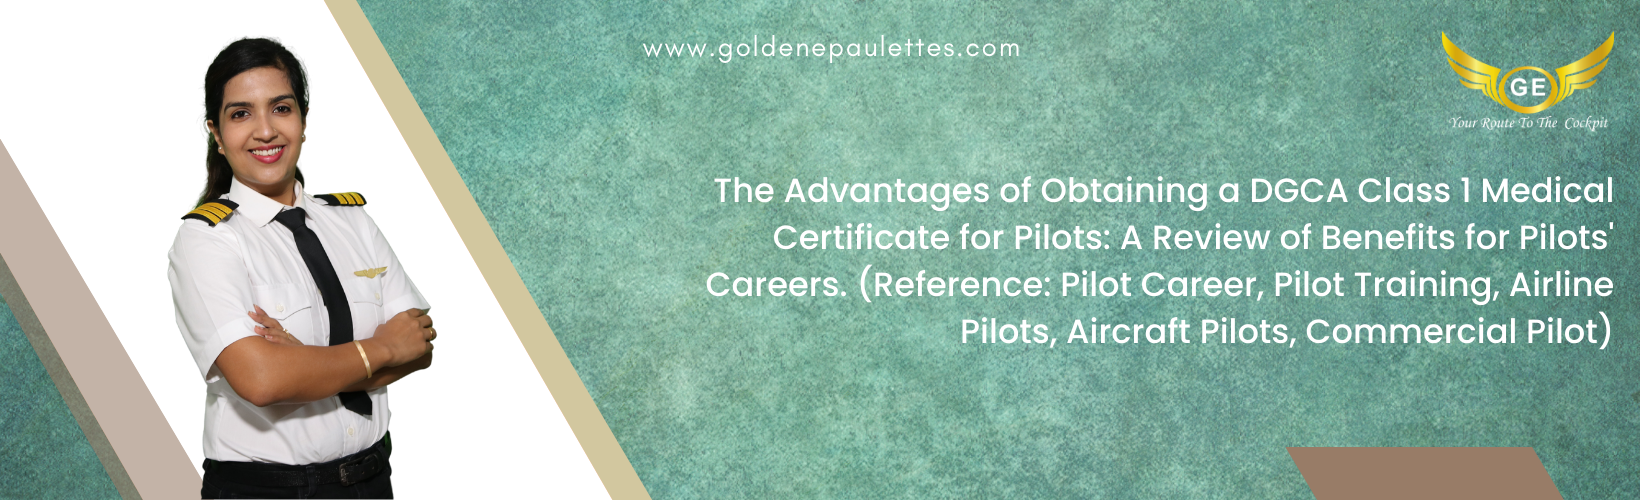 The Benefits of Having a DGCA Class 1 Medical Certificate for Pilots